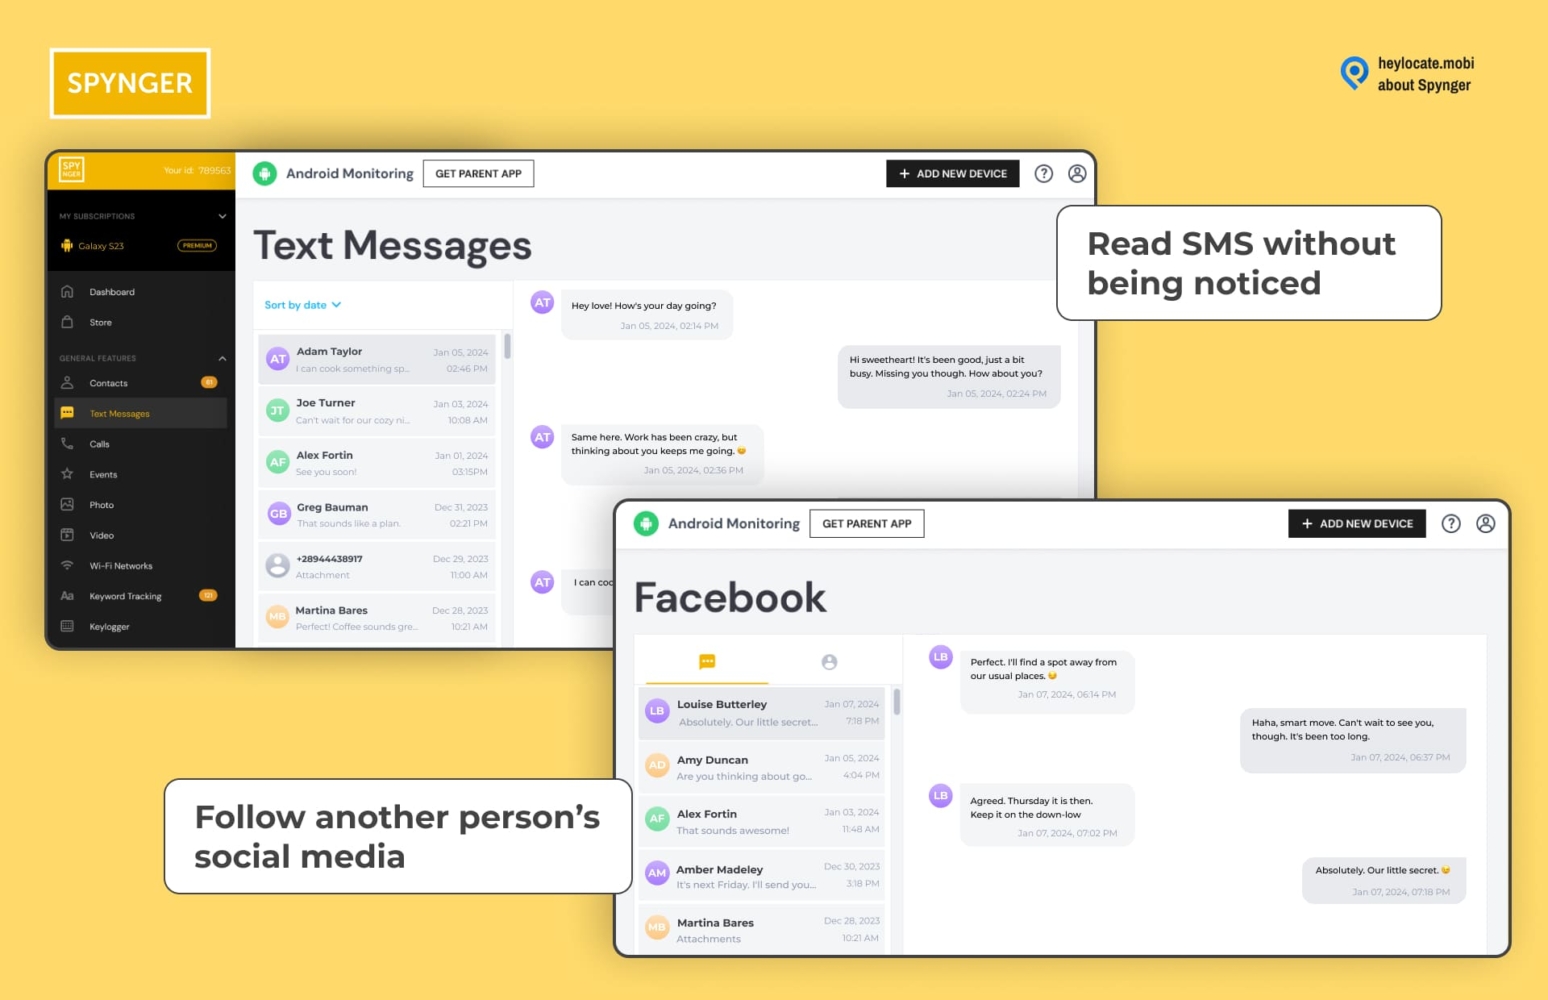 A bright and informative SPYNGER app image showcasing features for monitoring text messages and social media activity. The left side of the image displays an interface snippet for text message monitoring, with a list of contacts and a preview of messages. The right side shows a pop-up message promoting the feature to 'Read SMS without being noticed.' Below, a section of the Facebook monitoring interface reveals conversation snippets, with a caption 'Follow another person’s social media' emphasizing the app's discreet tracking capabilities.